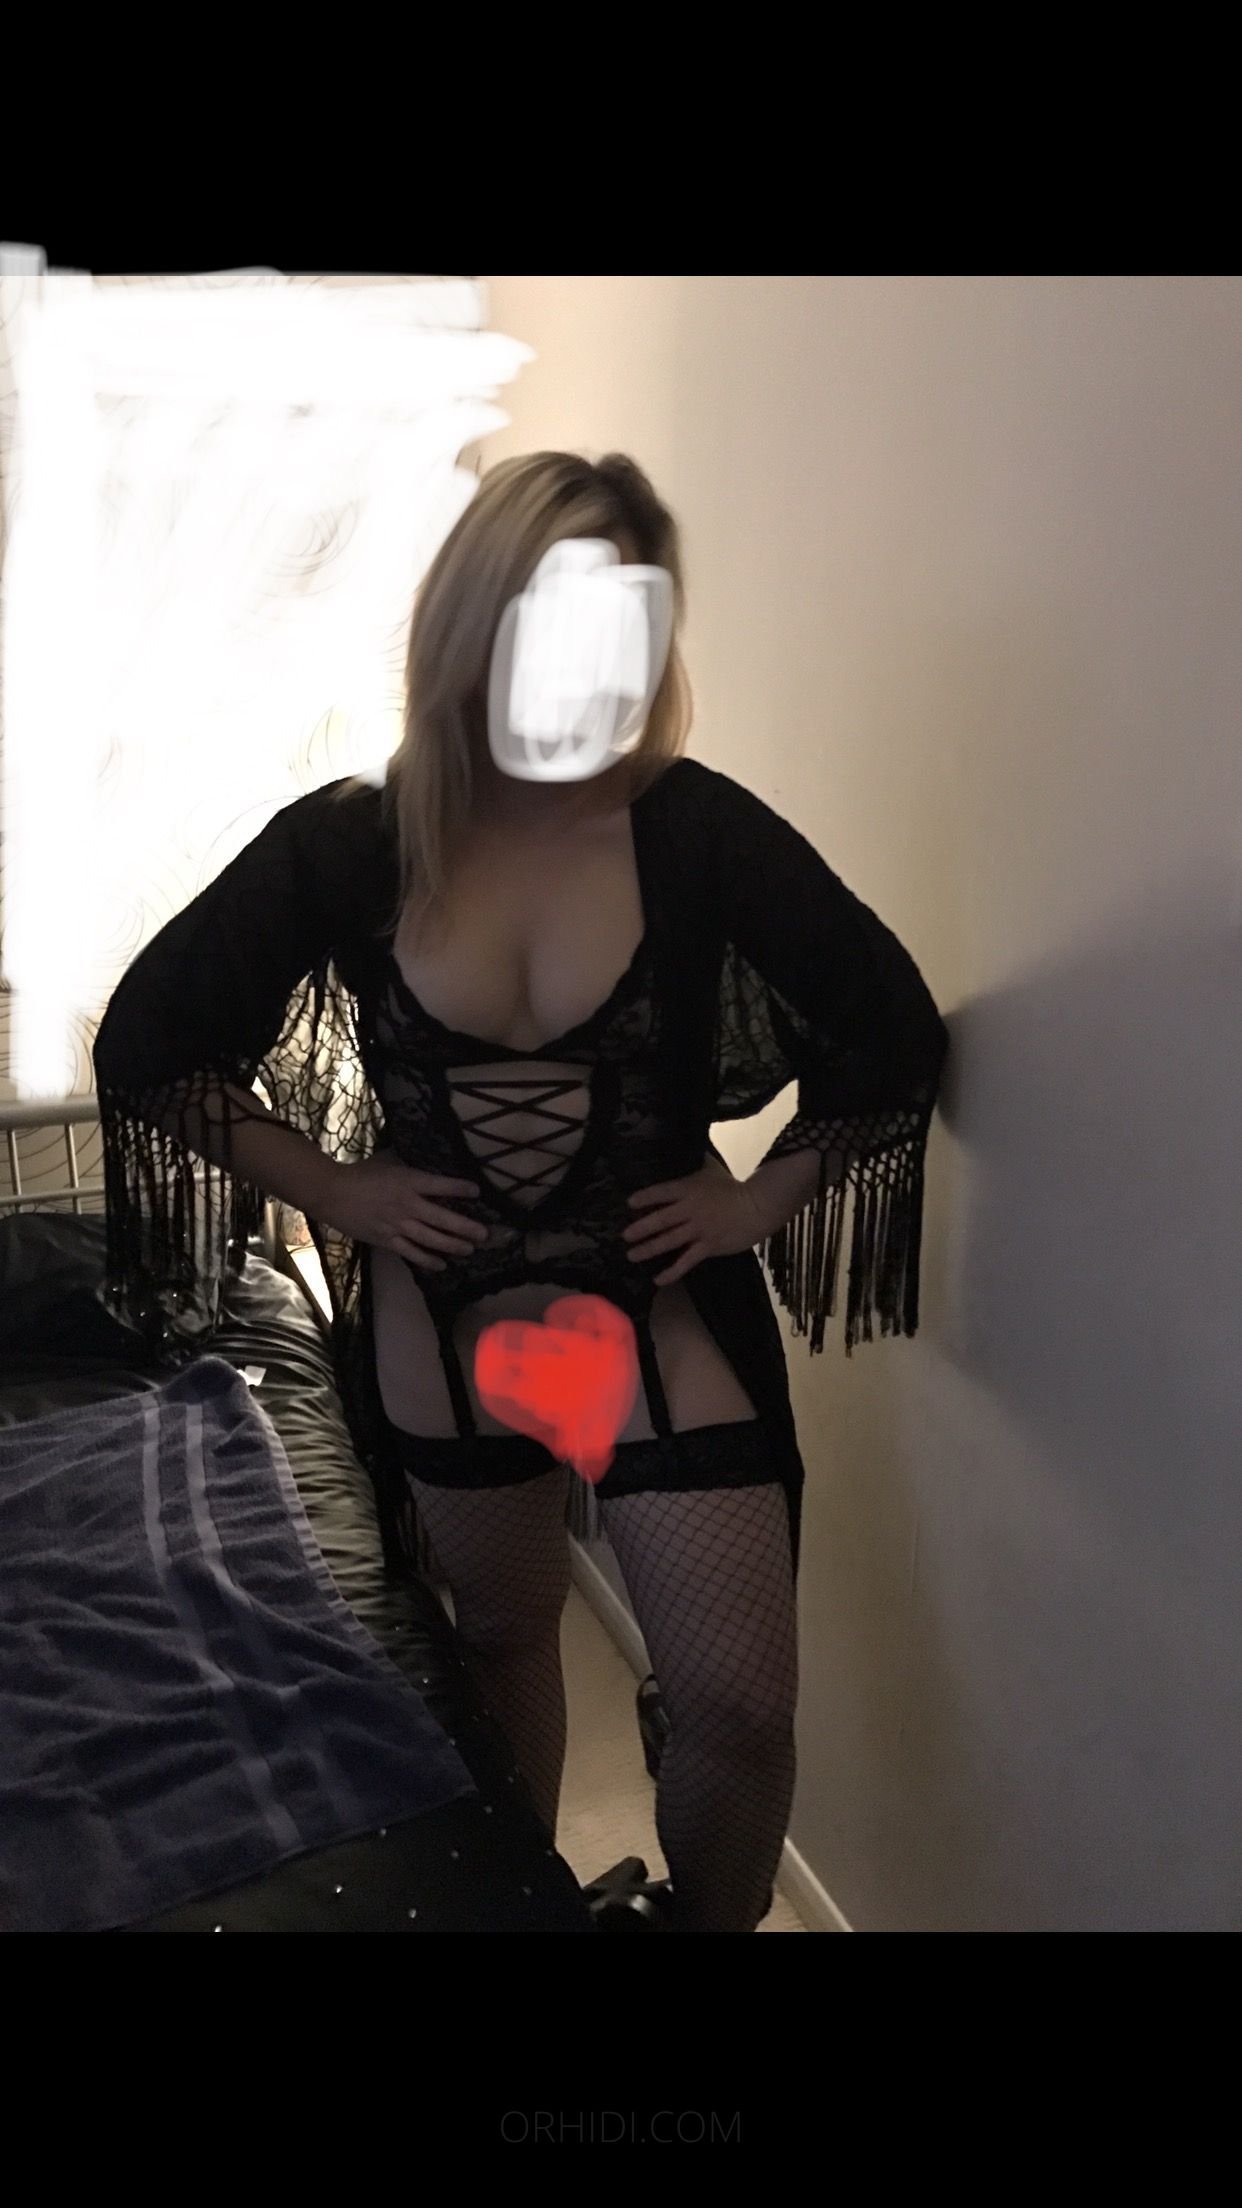 Best Private Models Are Waiting for You - model photo Kinkykate78